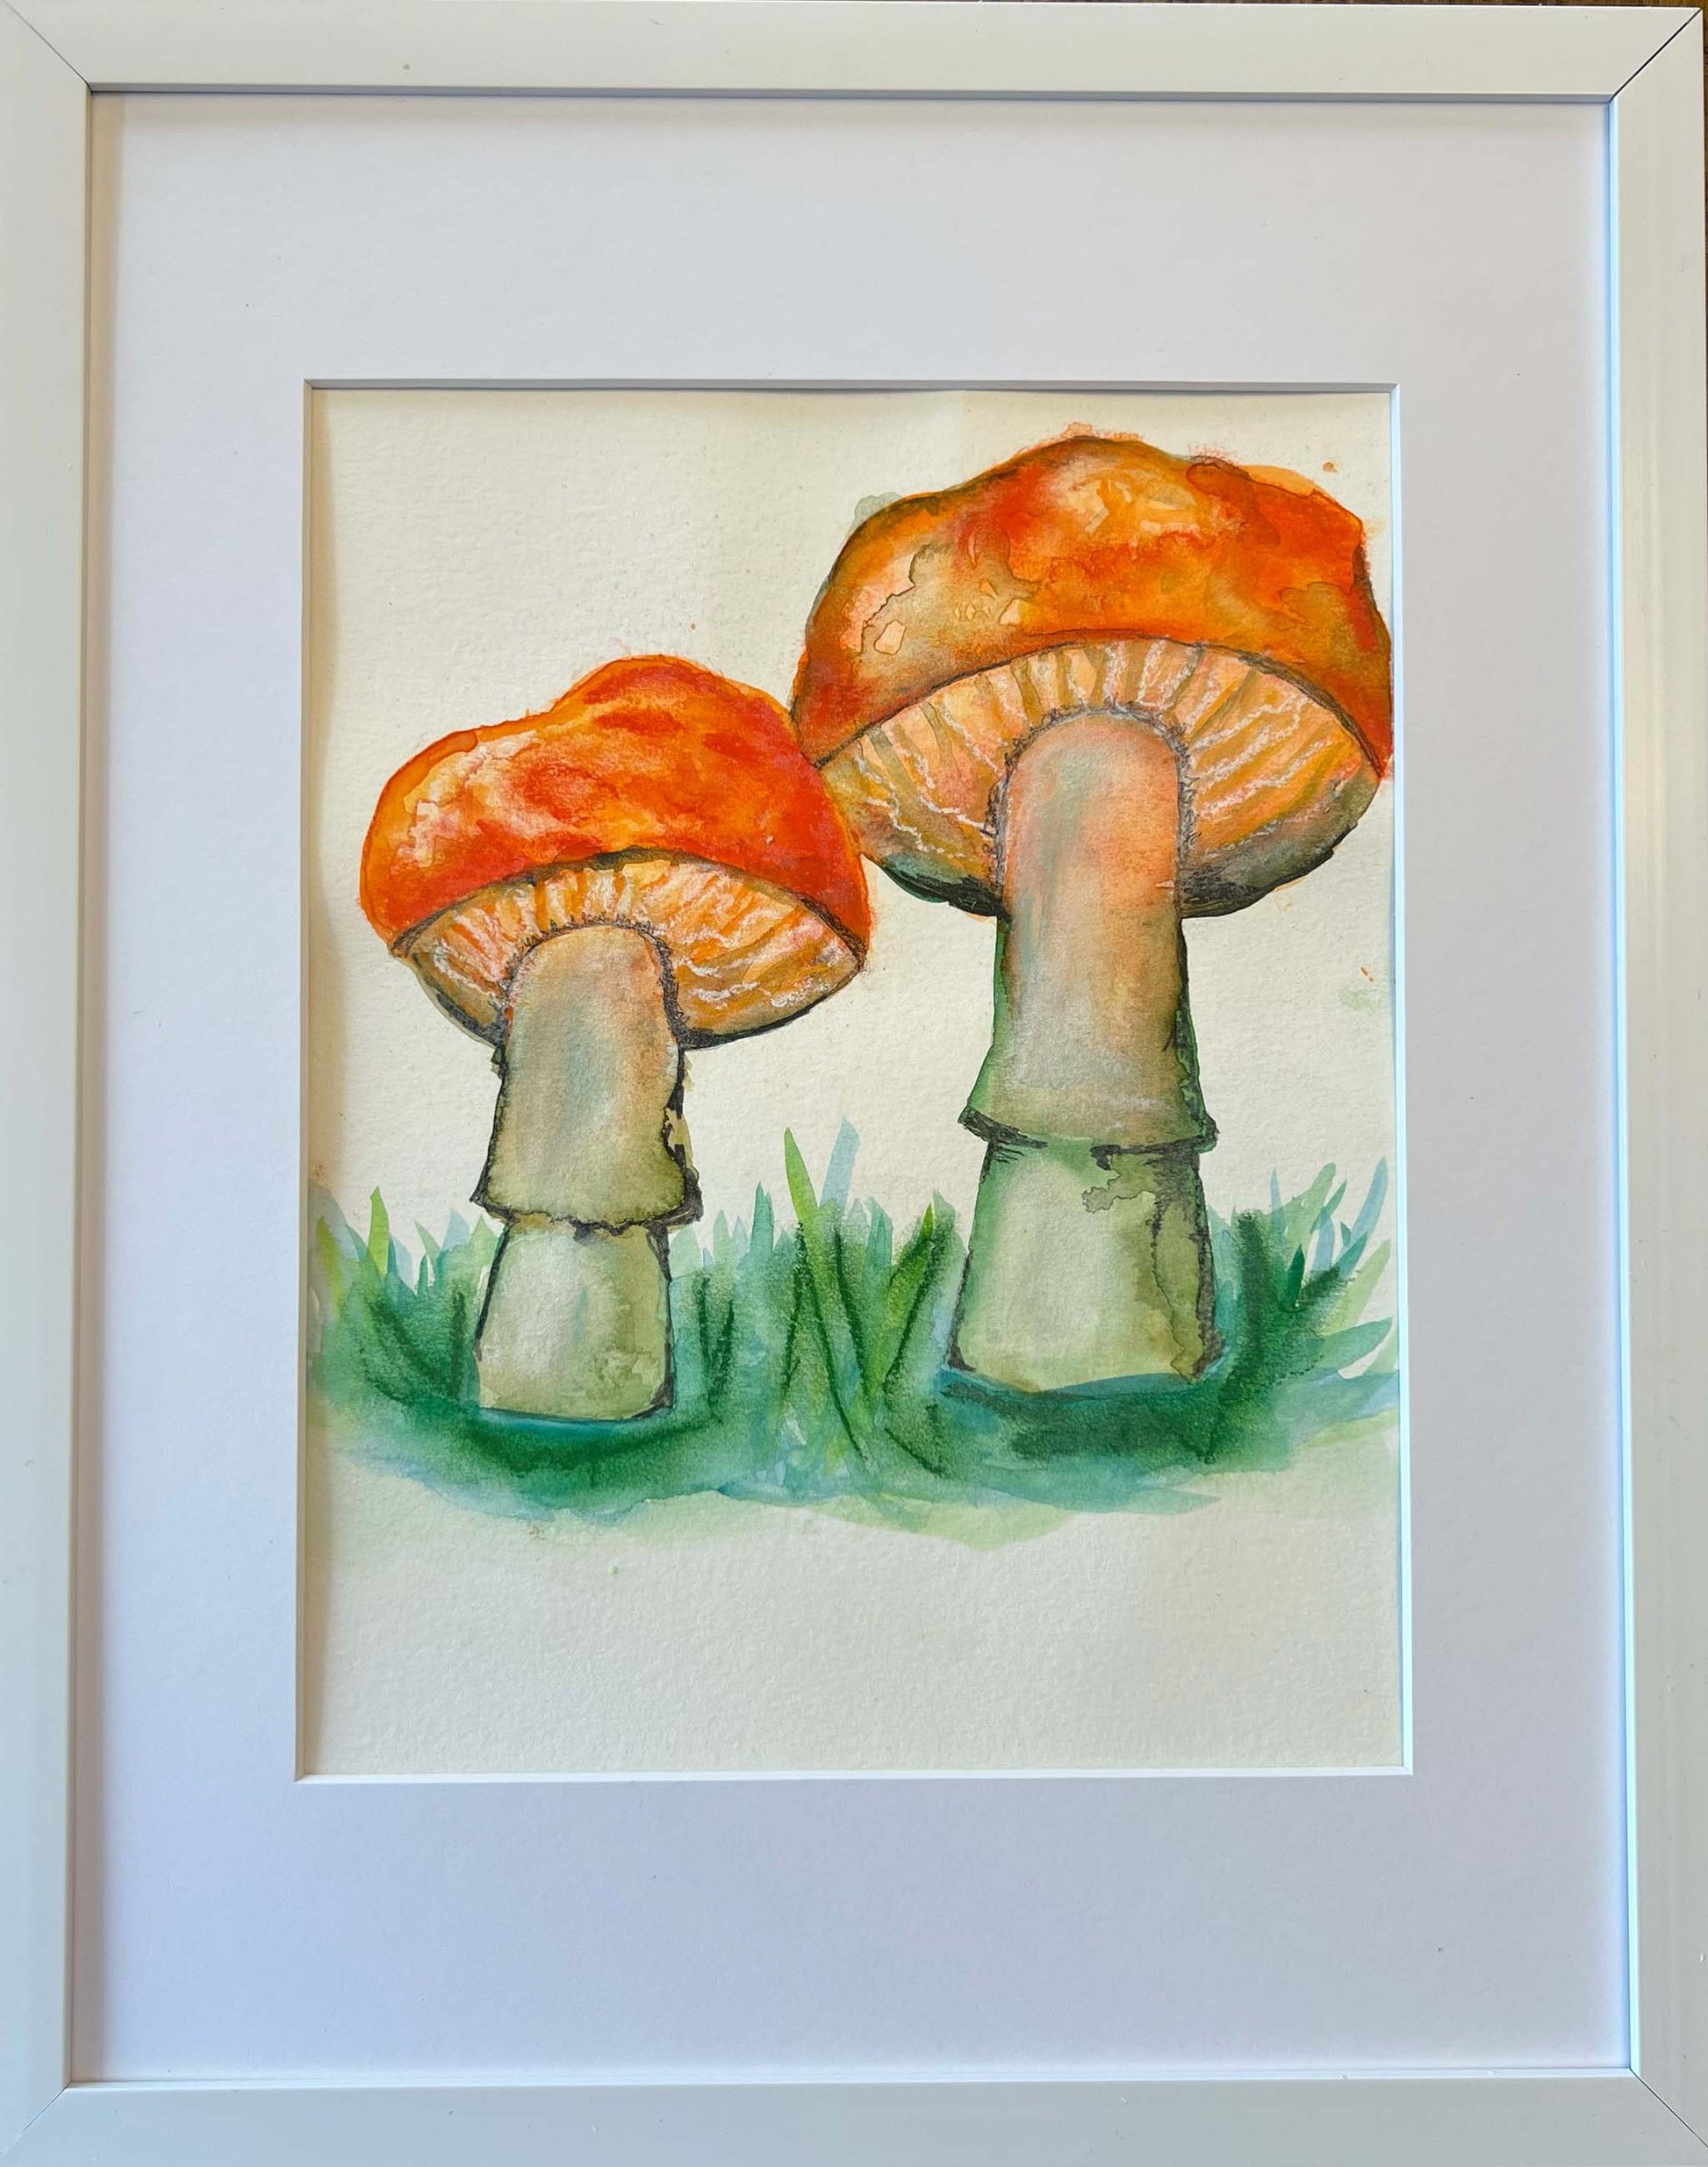 watercolor floral painting of two orange and yellow mushrooms